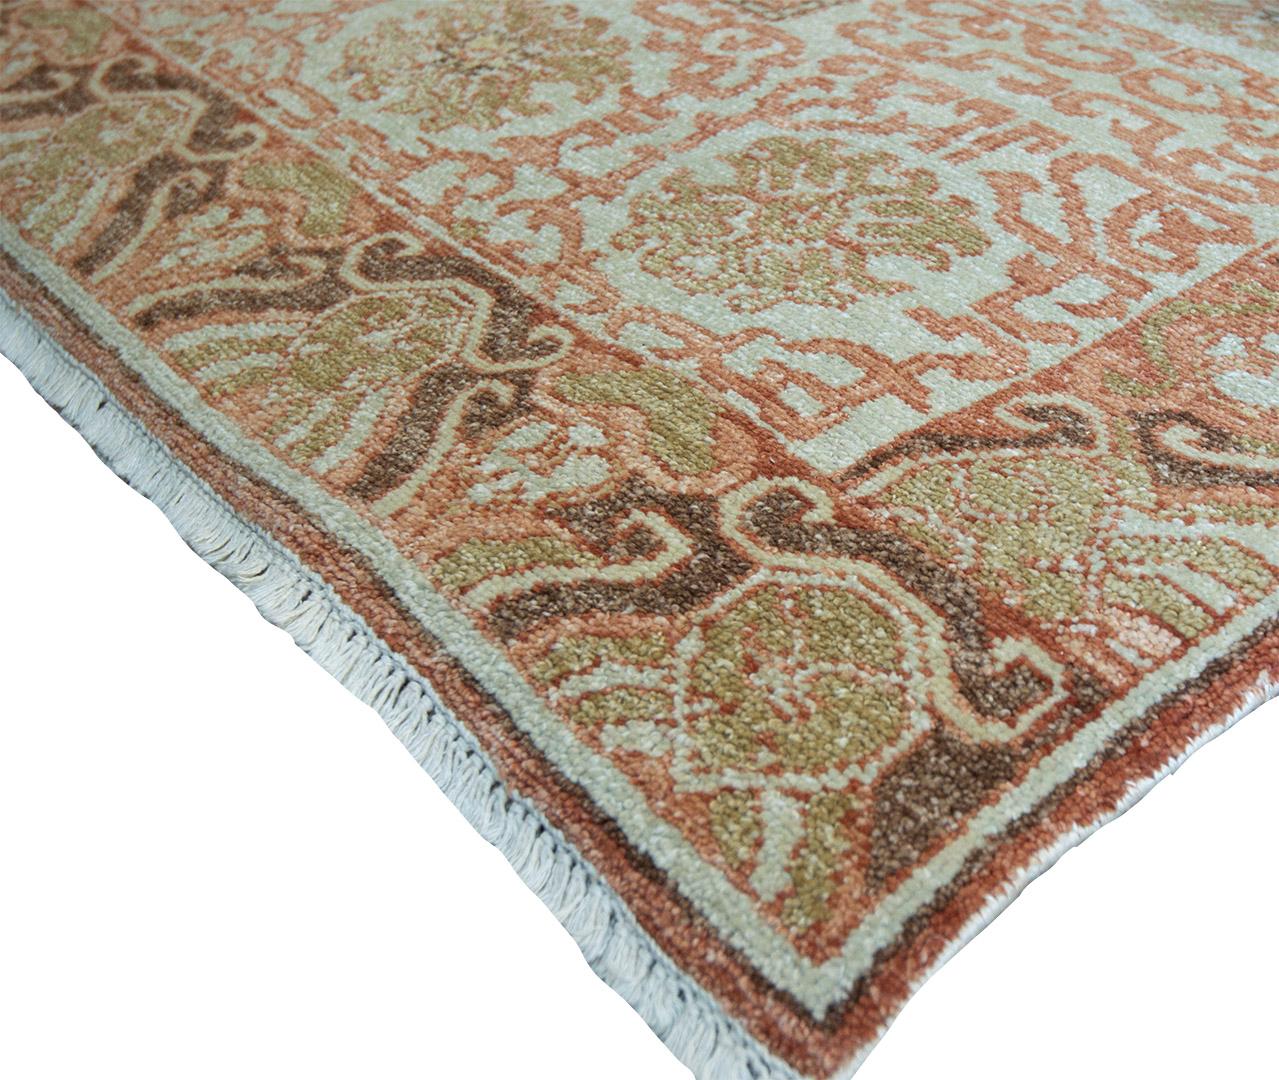 This unique one of a kind rug from Kashmir features a brilliant color combination and an amazingly decorative border. 100% natural wool pile. Brand new.